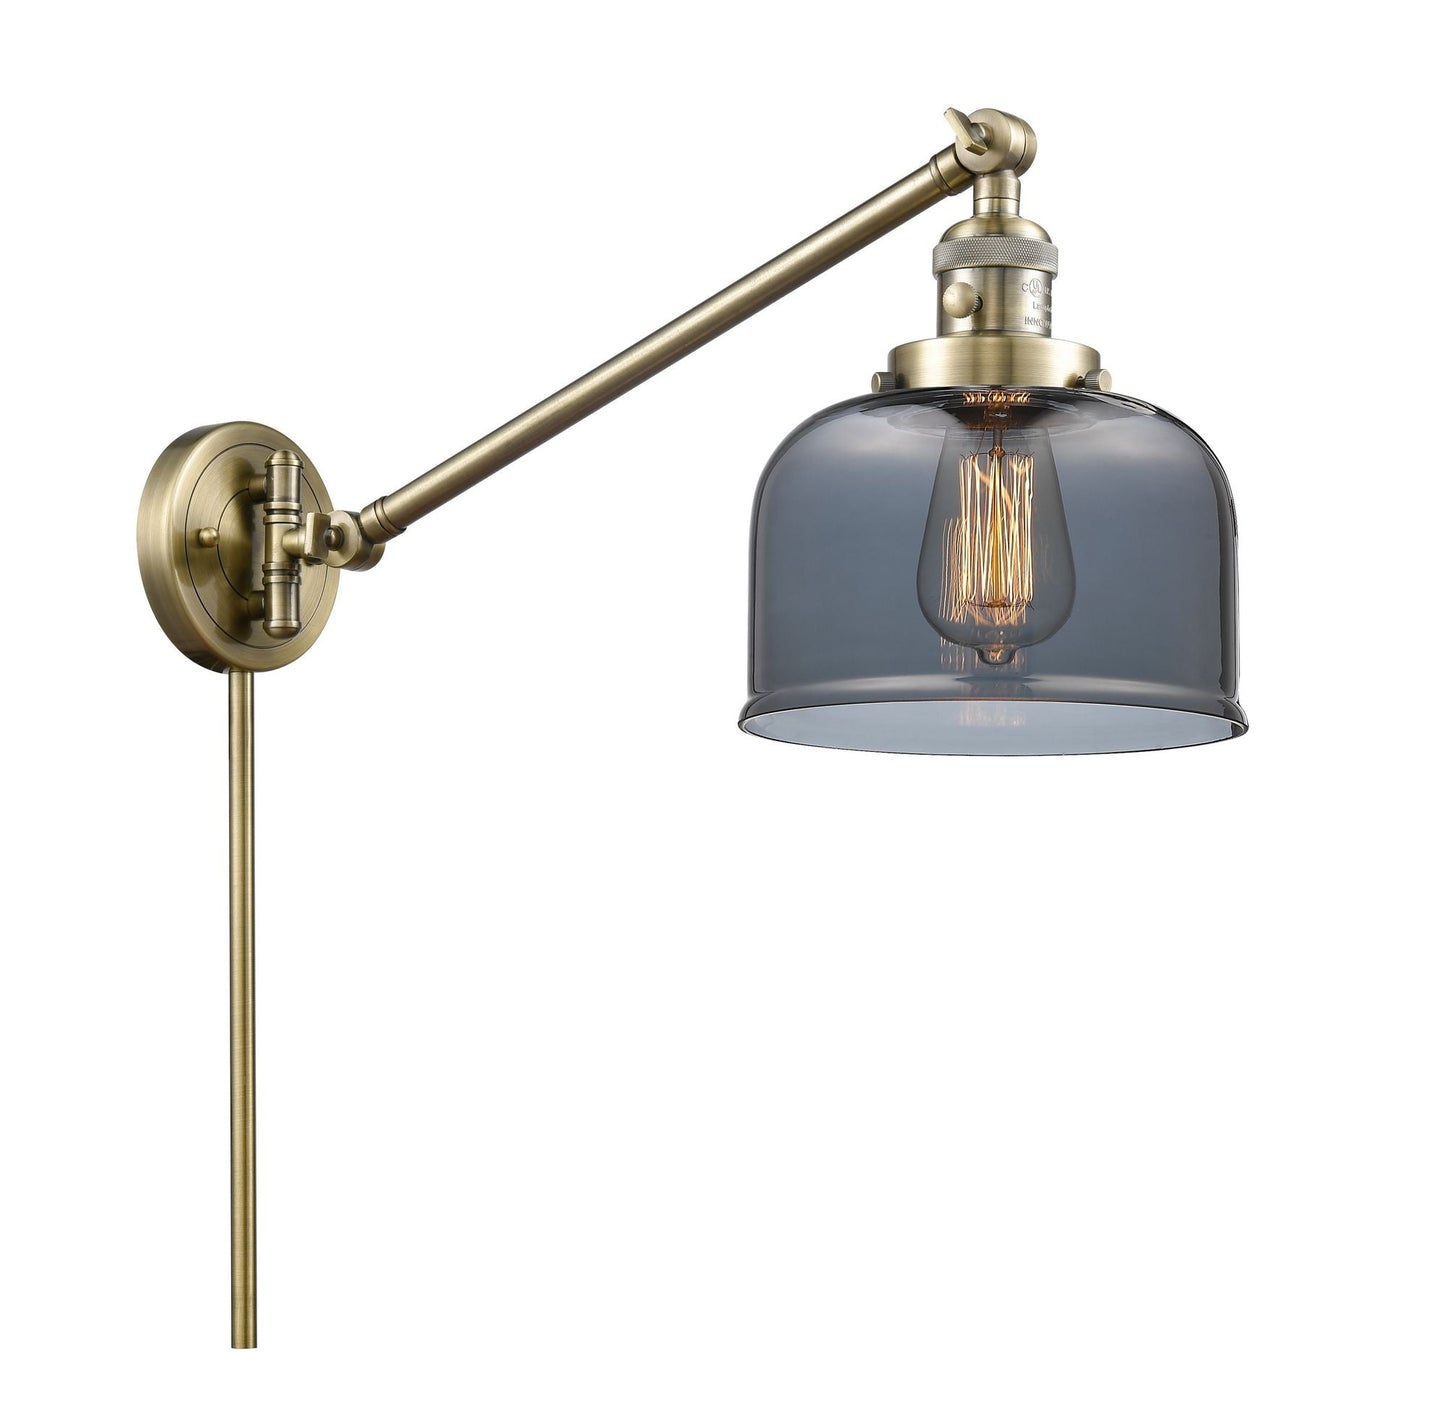 1-Light 8" Bell Swing Arm With Switch - Bell-Urn Plated Smoke Glass - Choice of Finish And Incandesent Or LED Bulbs